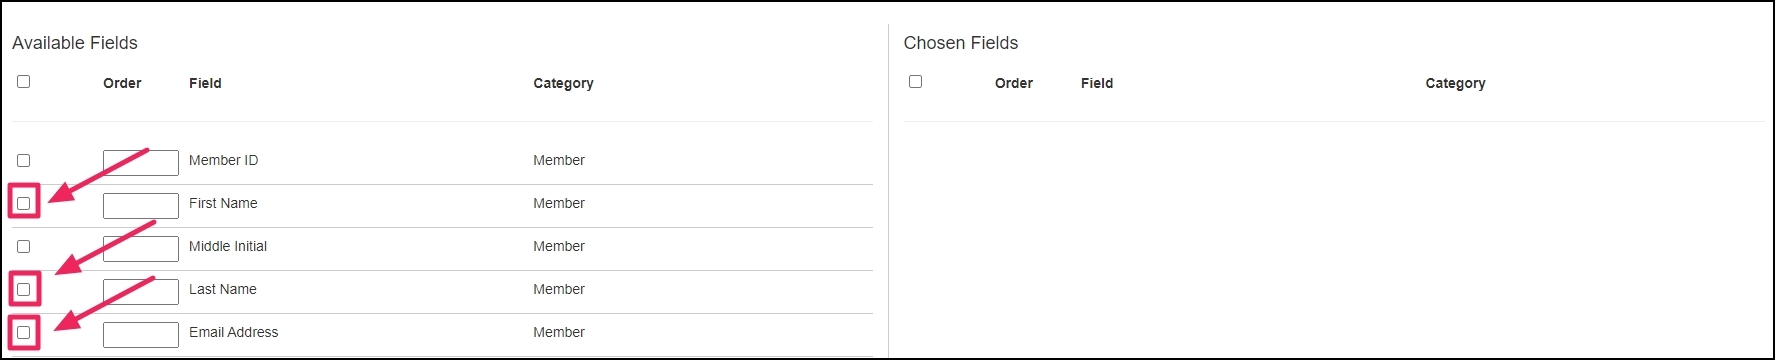 image partial list of fields available with arrows pointing to the checkbox next to each field